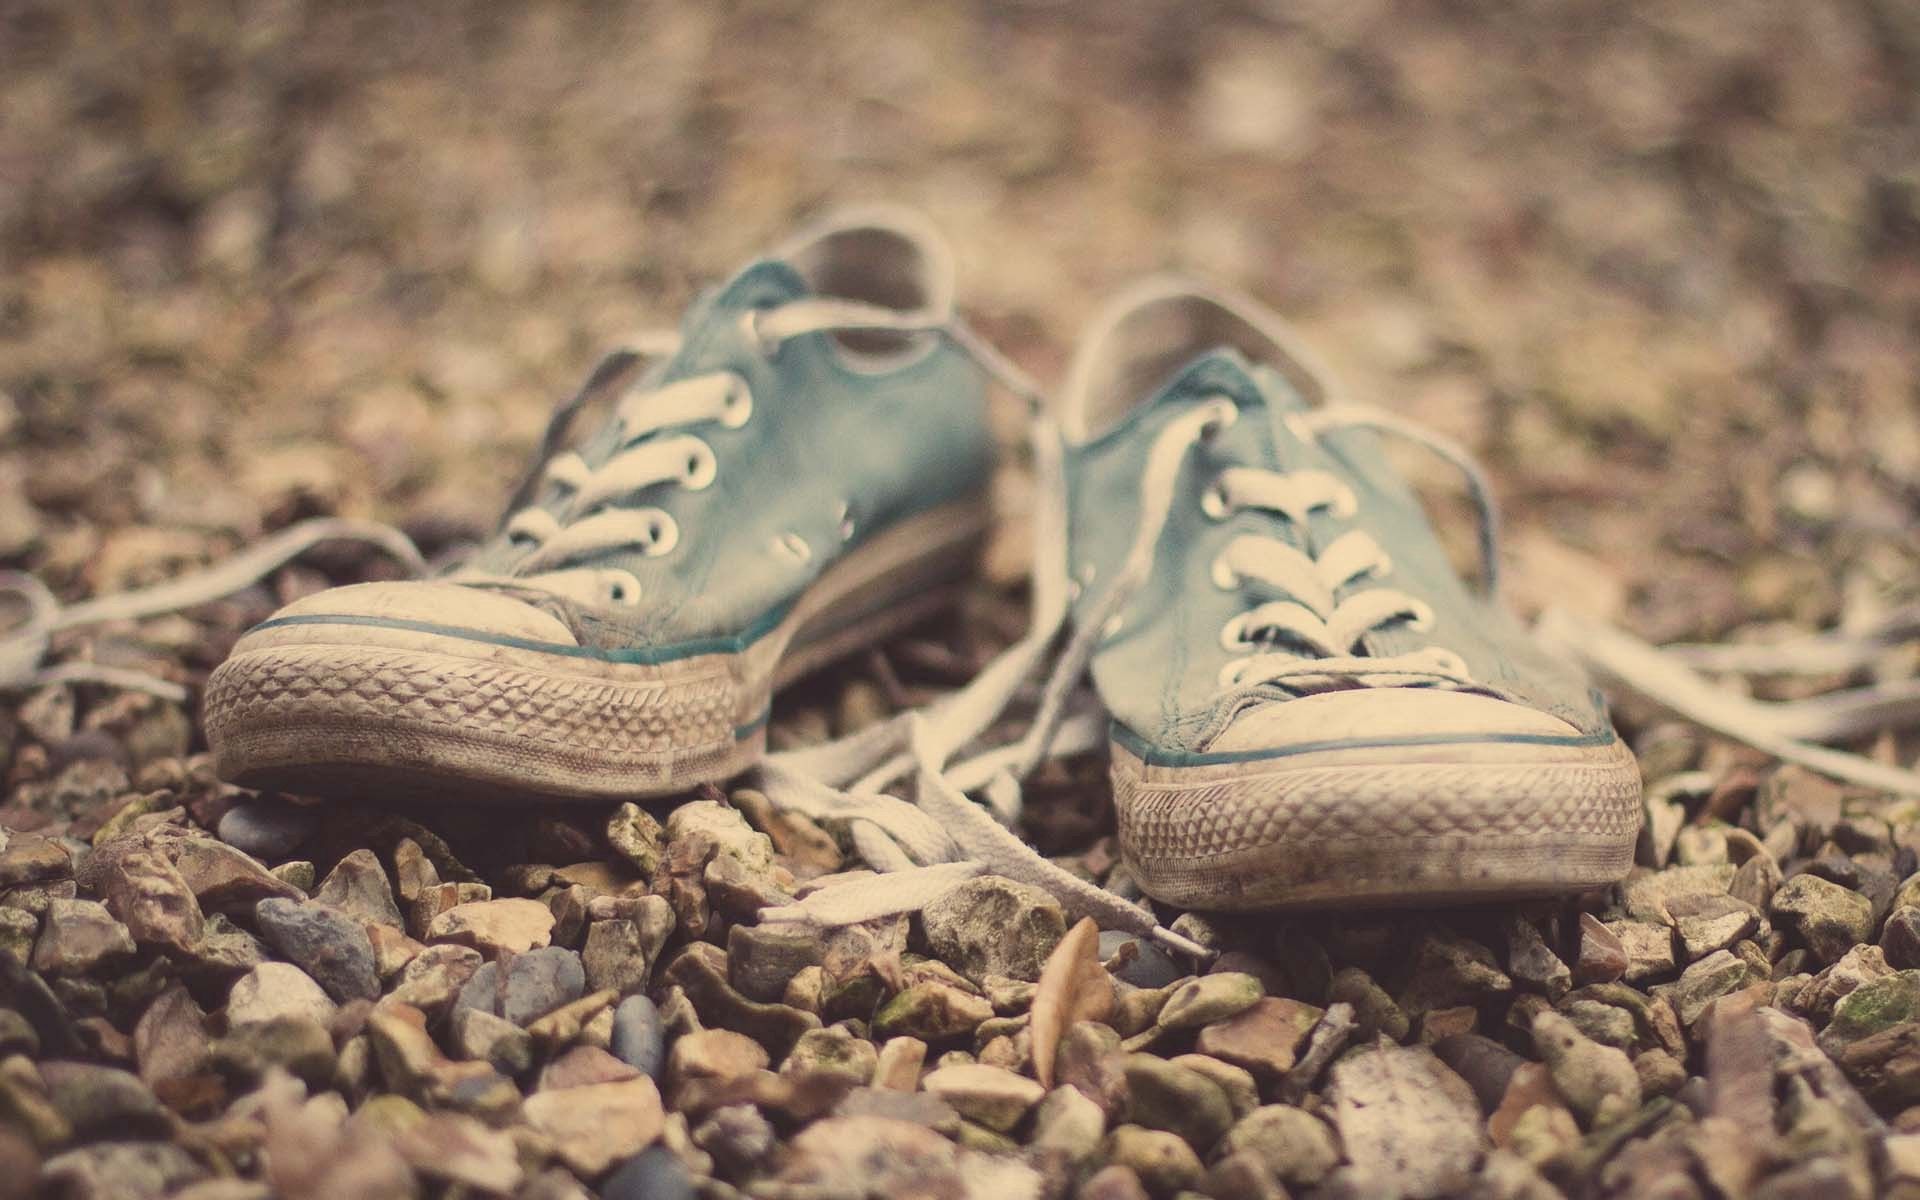 footwear, stones, miscellanea, miscellaneous, sneakers, old, mud, dirt, shoes